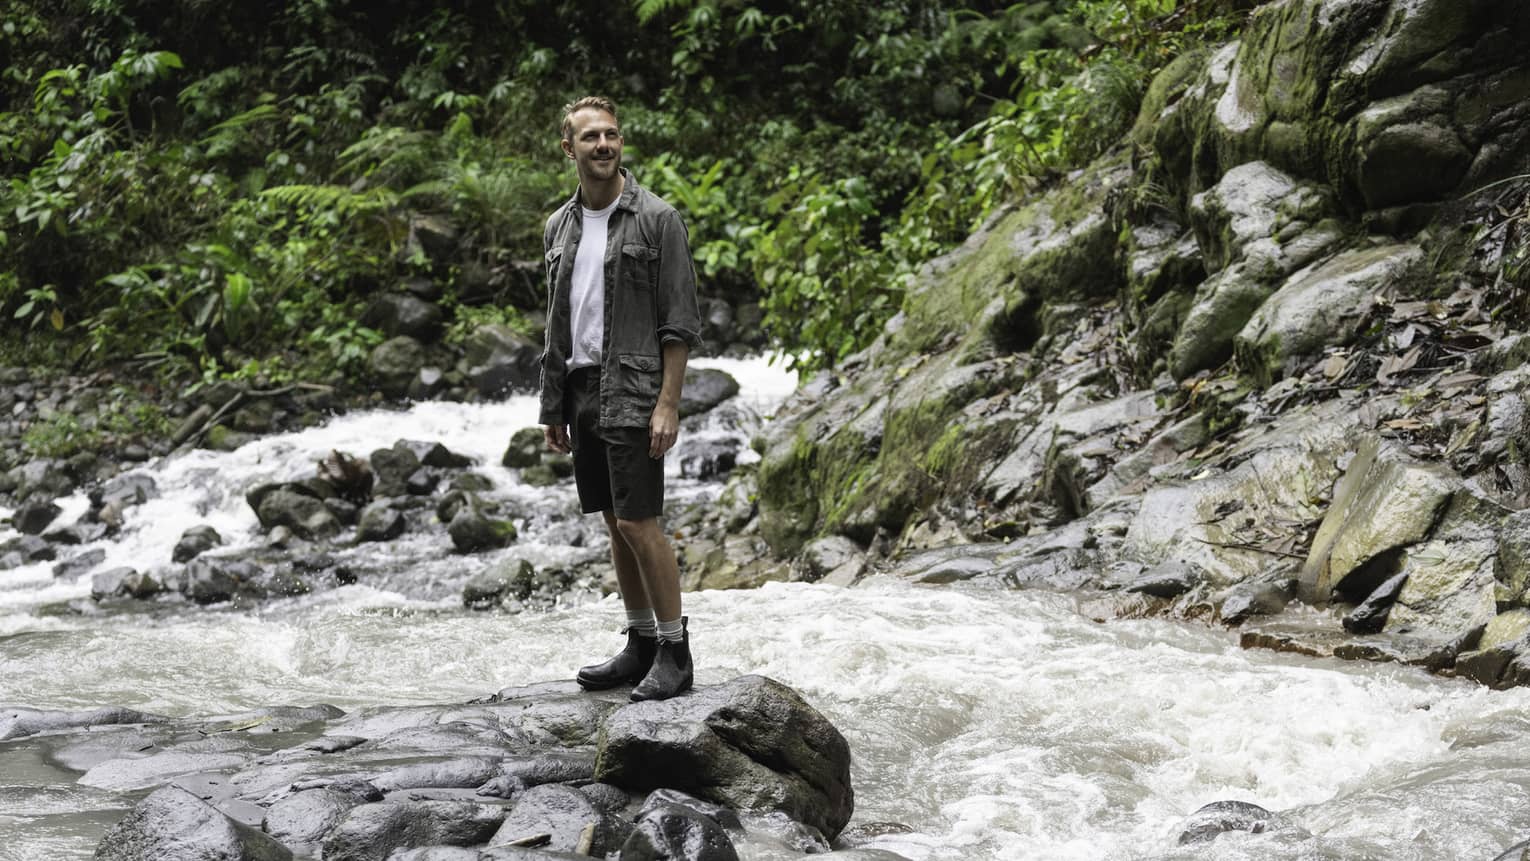 Man wearing hiking jacket, white t-shirt, shorts and hiking boots stands on a cluster of rocks in the middle of a rushing river